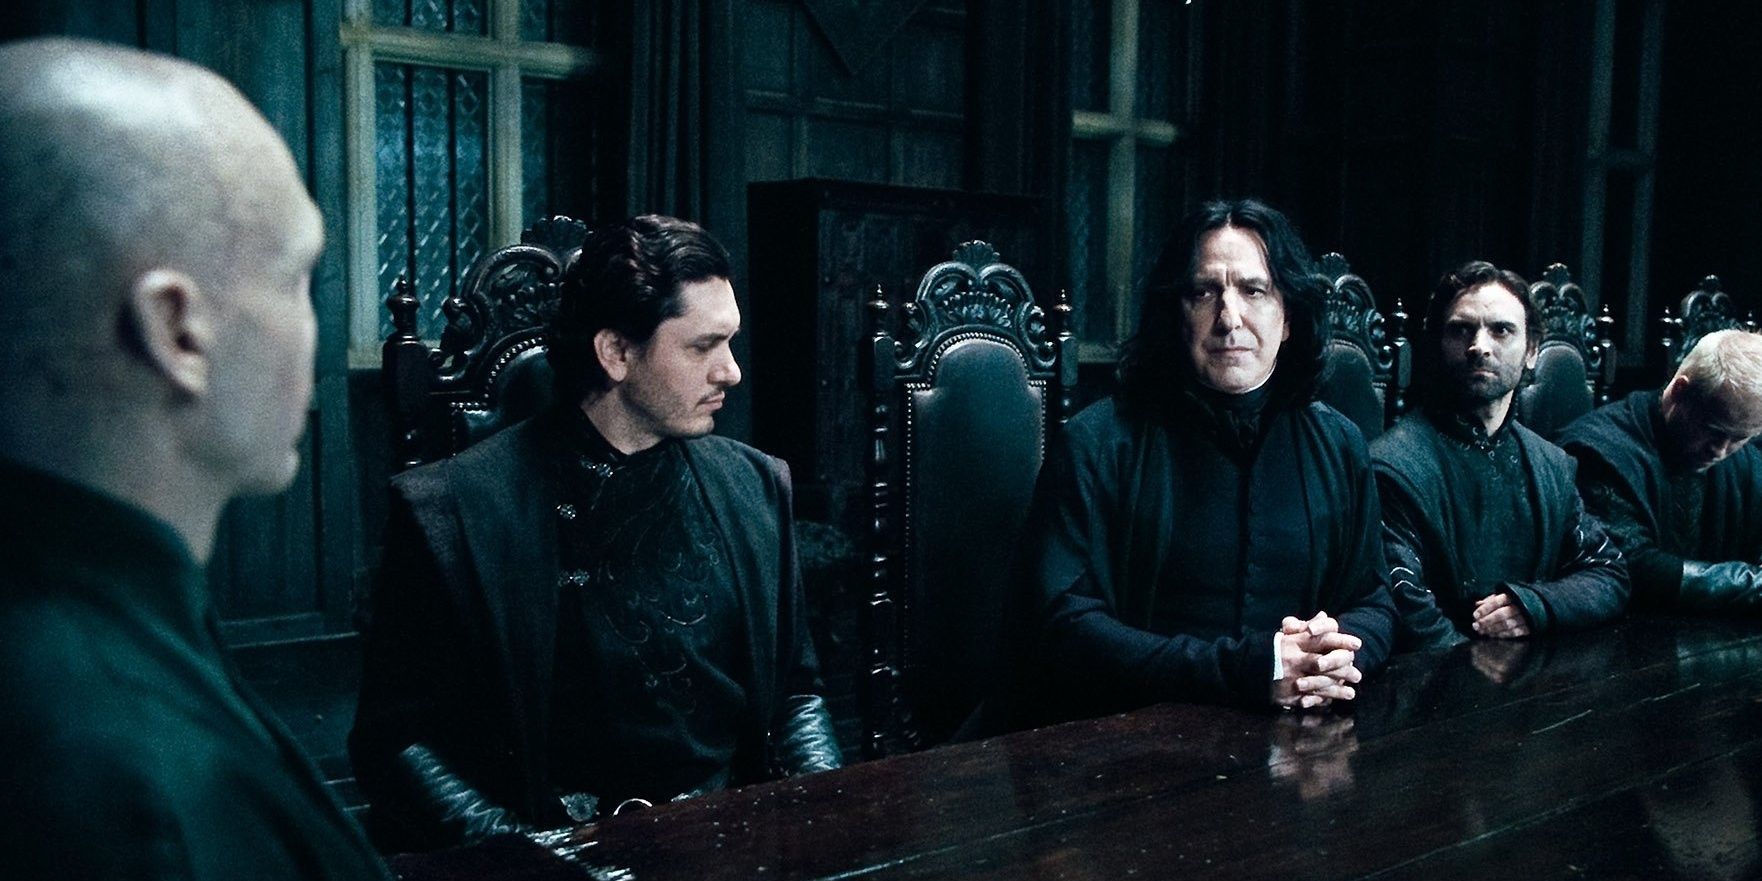 Harry Potter Why Fans Want A Snape Prequel Series